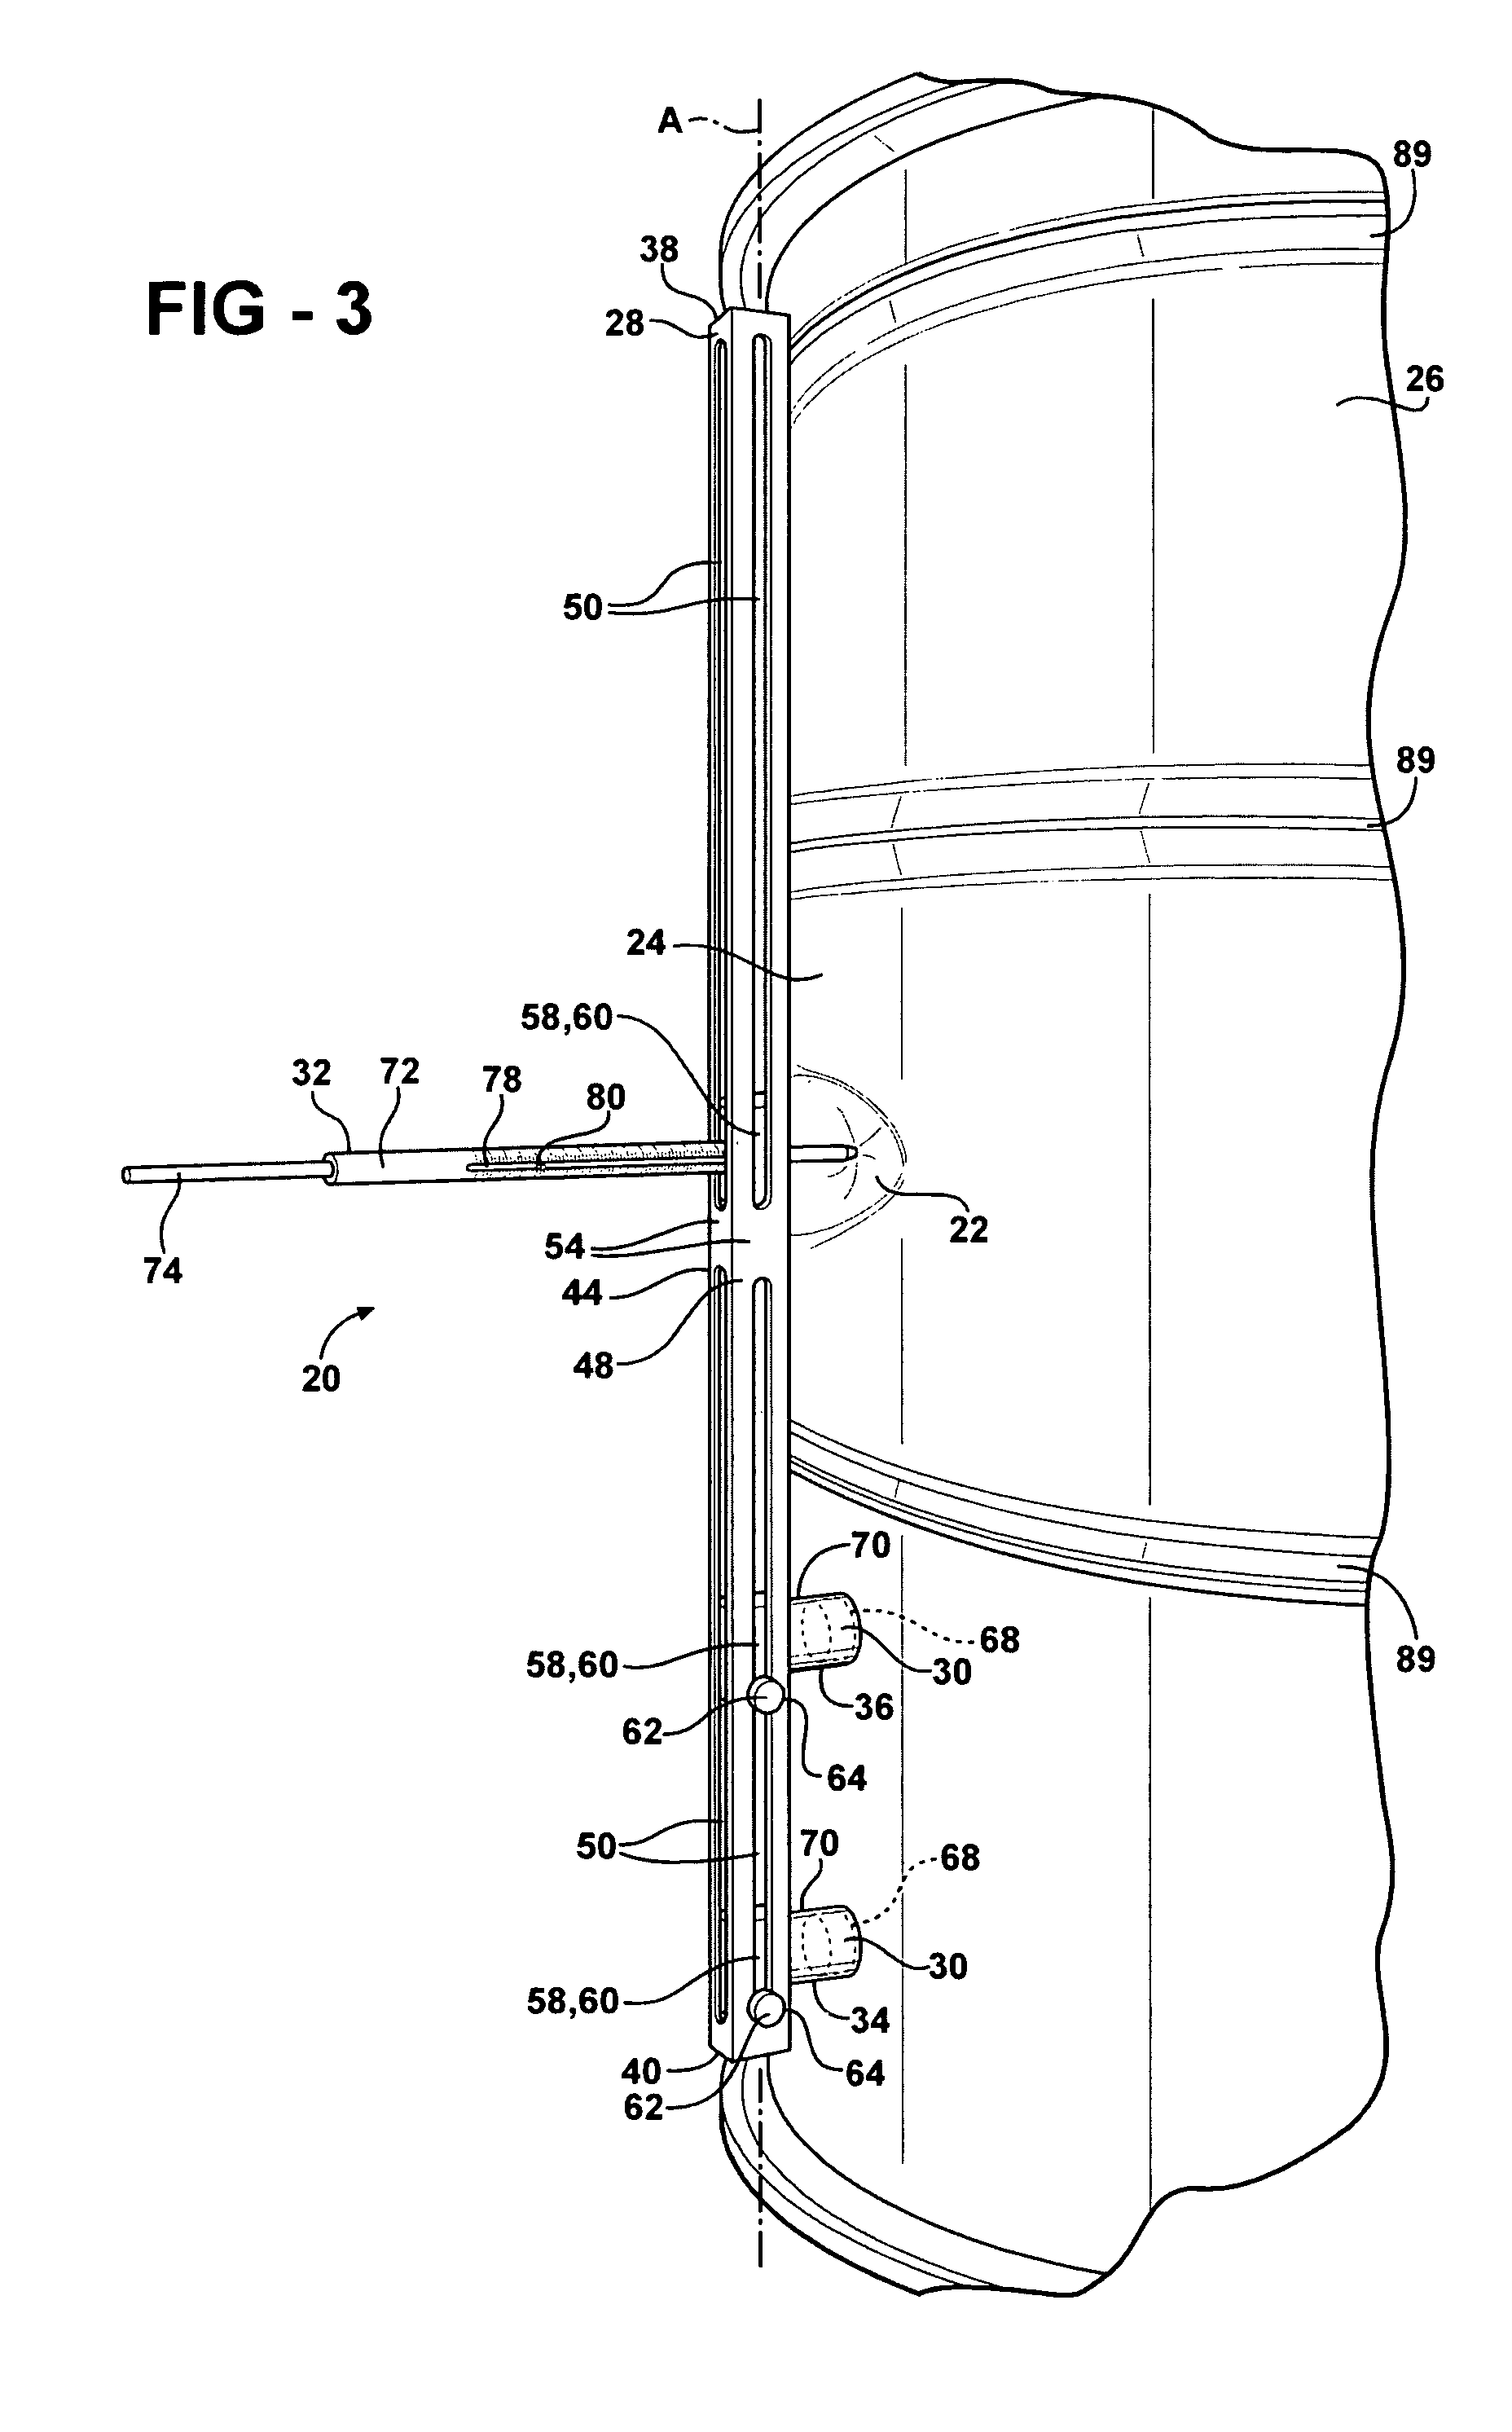 Method of measuring dents and method of classifying dents